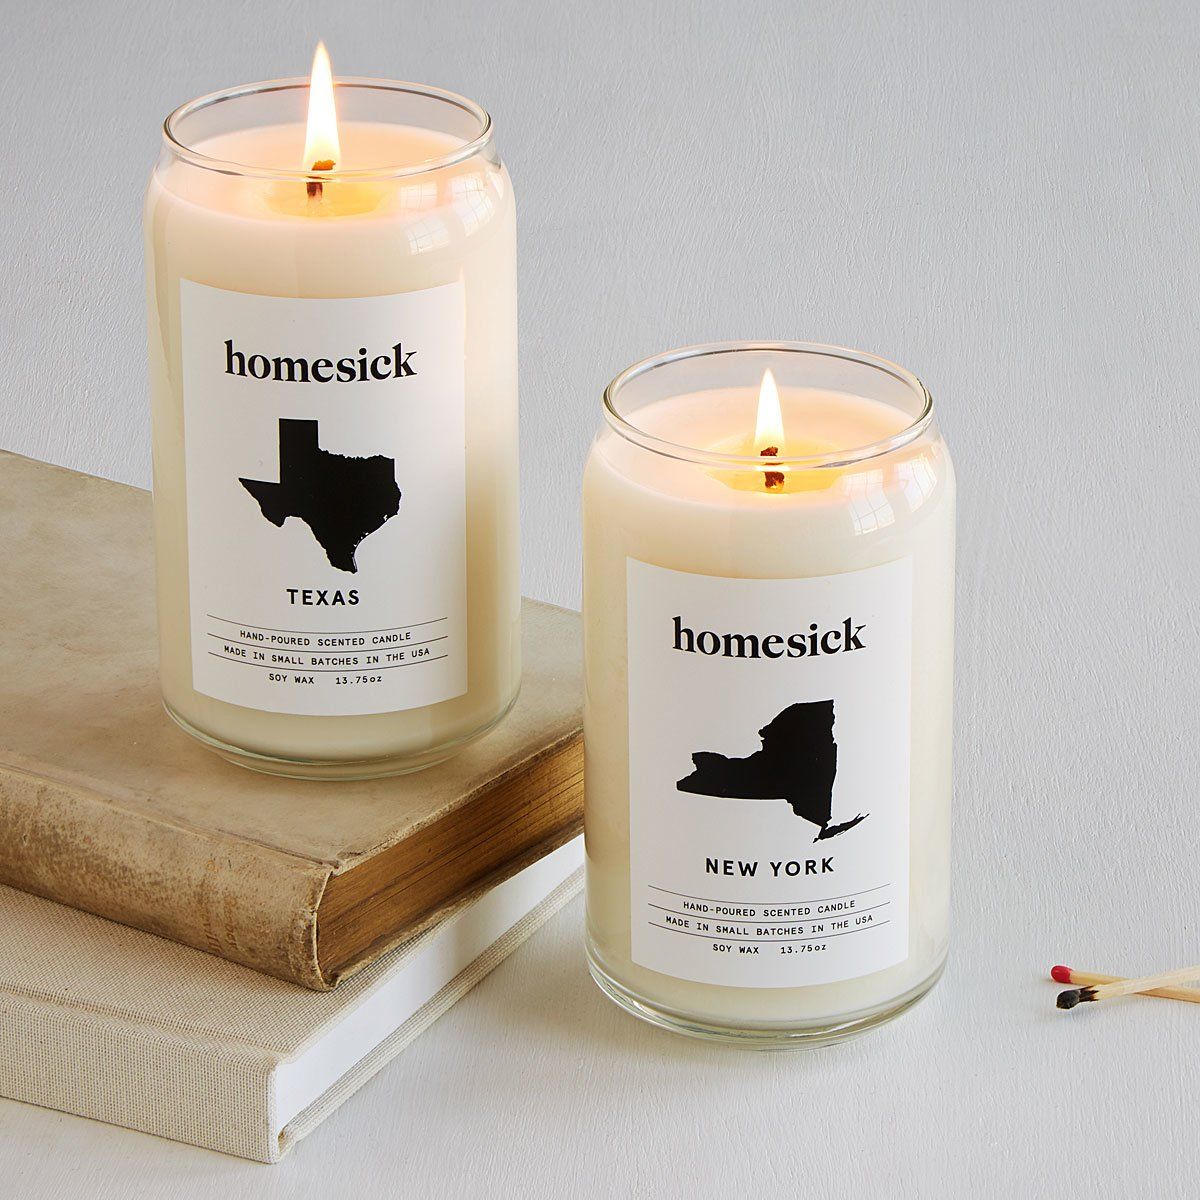 She may have moved away, but this candle will help your sister keep the hom...